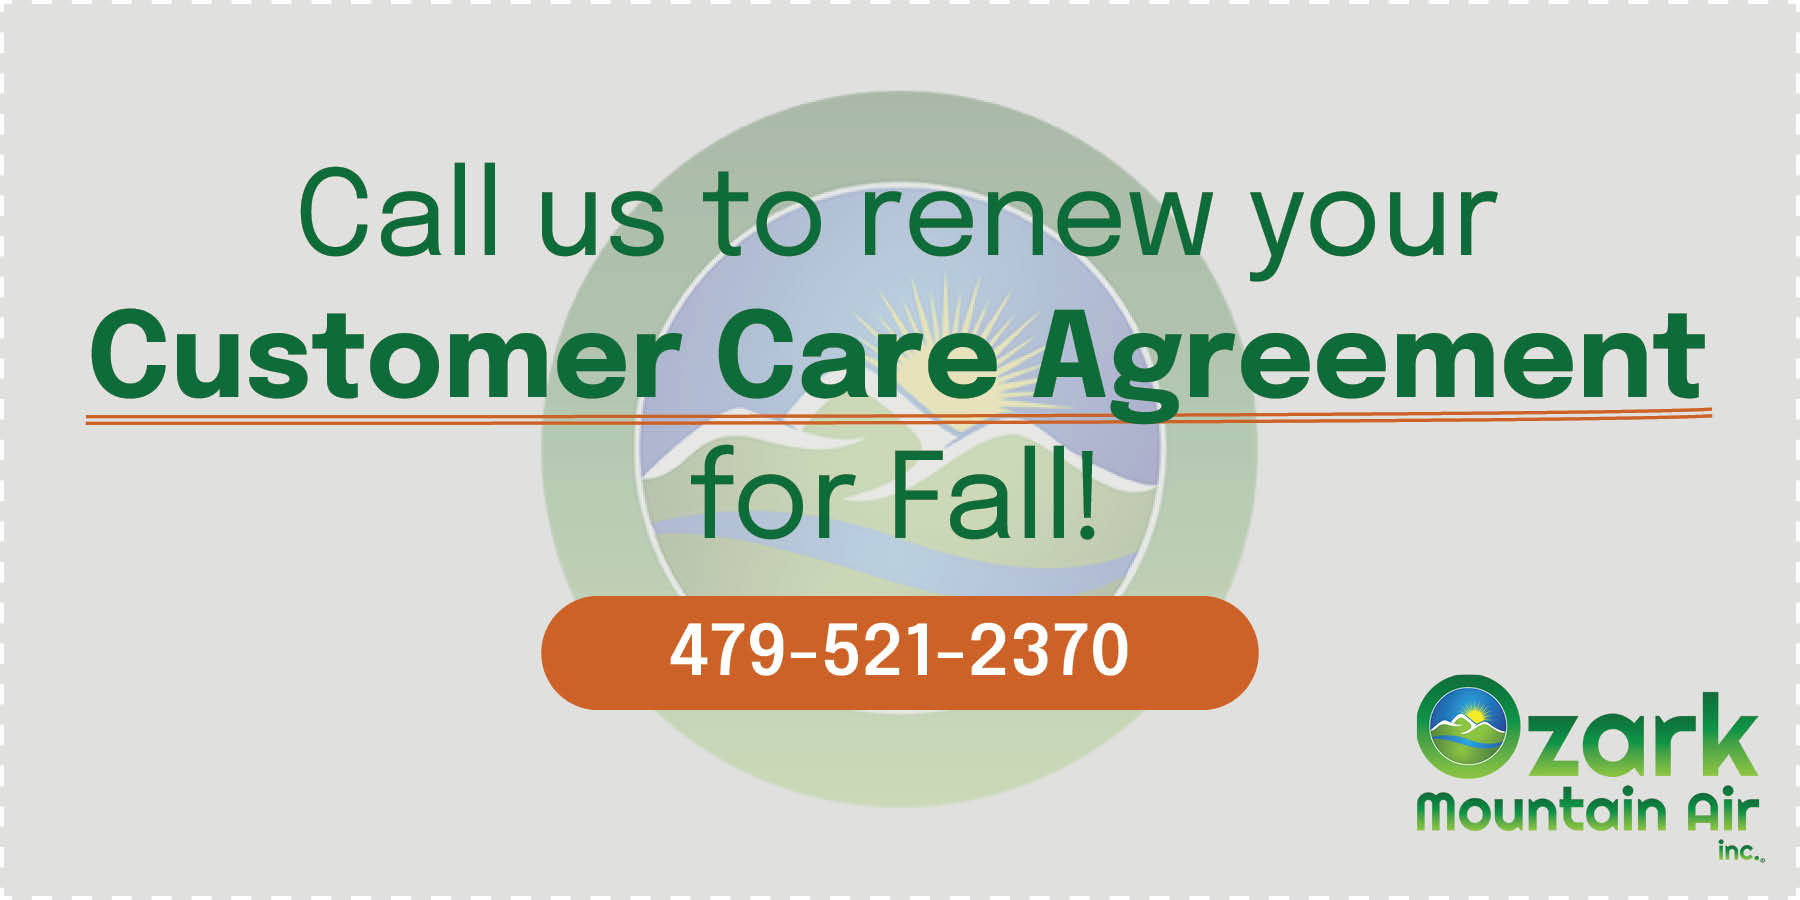 Call us to renew your Customer Care Agreement for Fall!